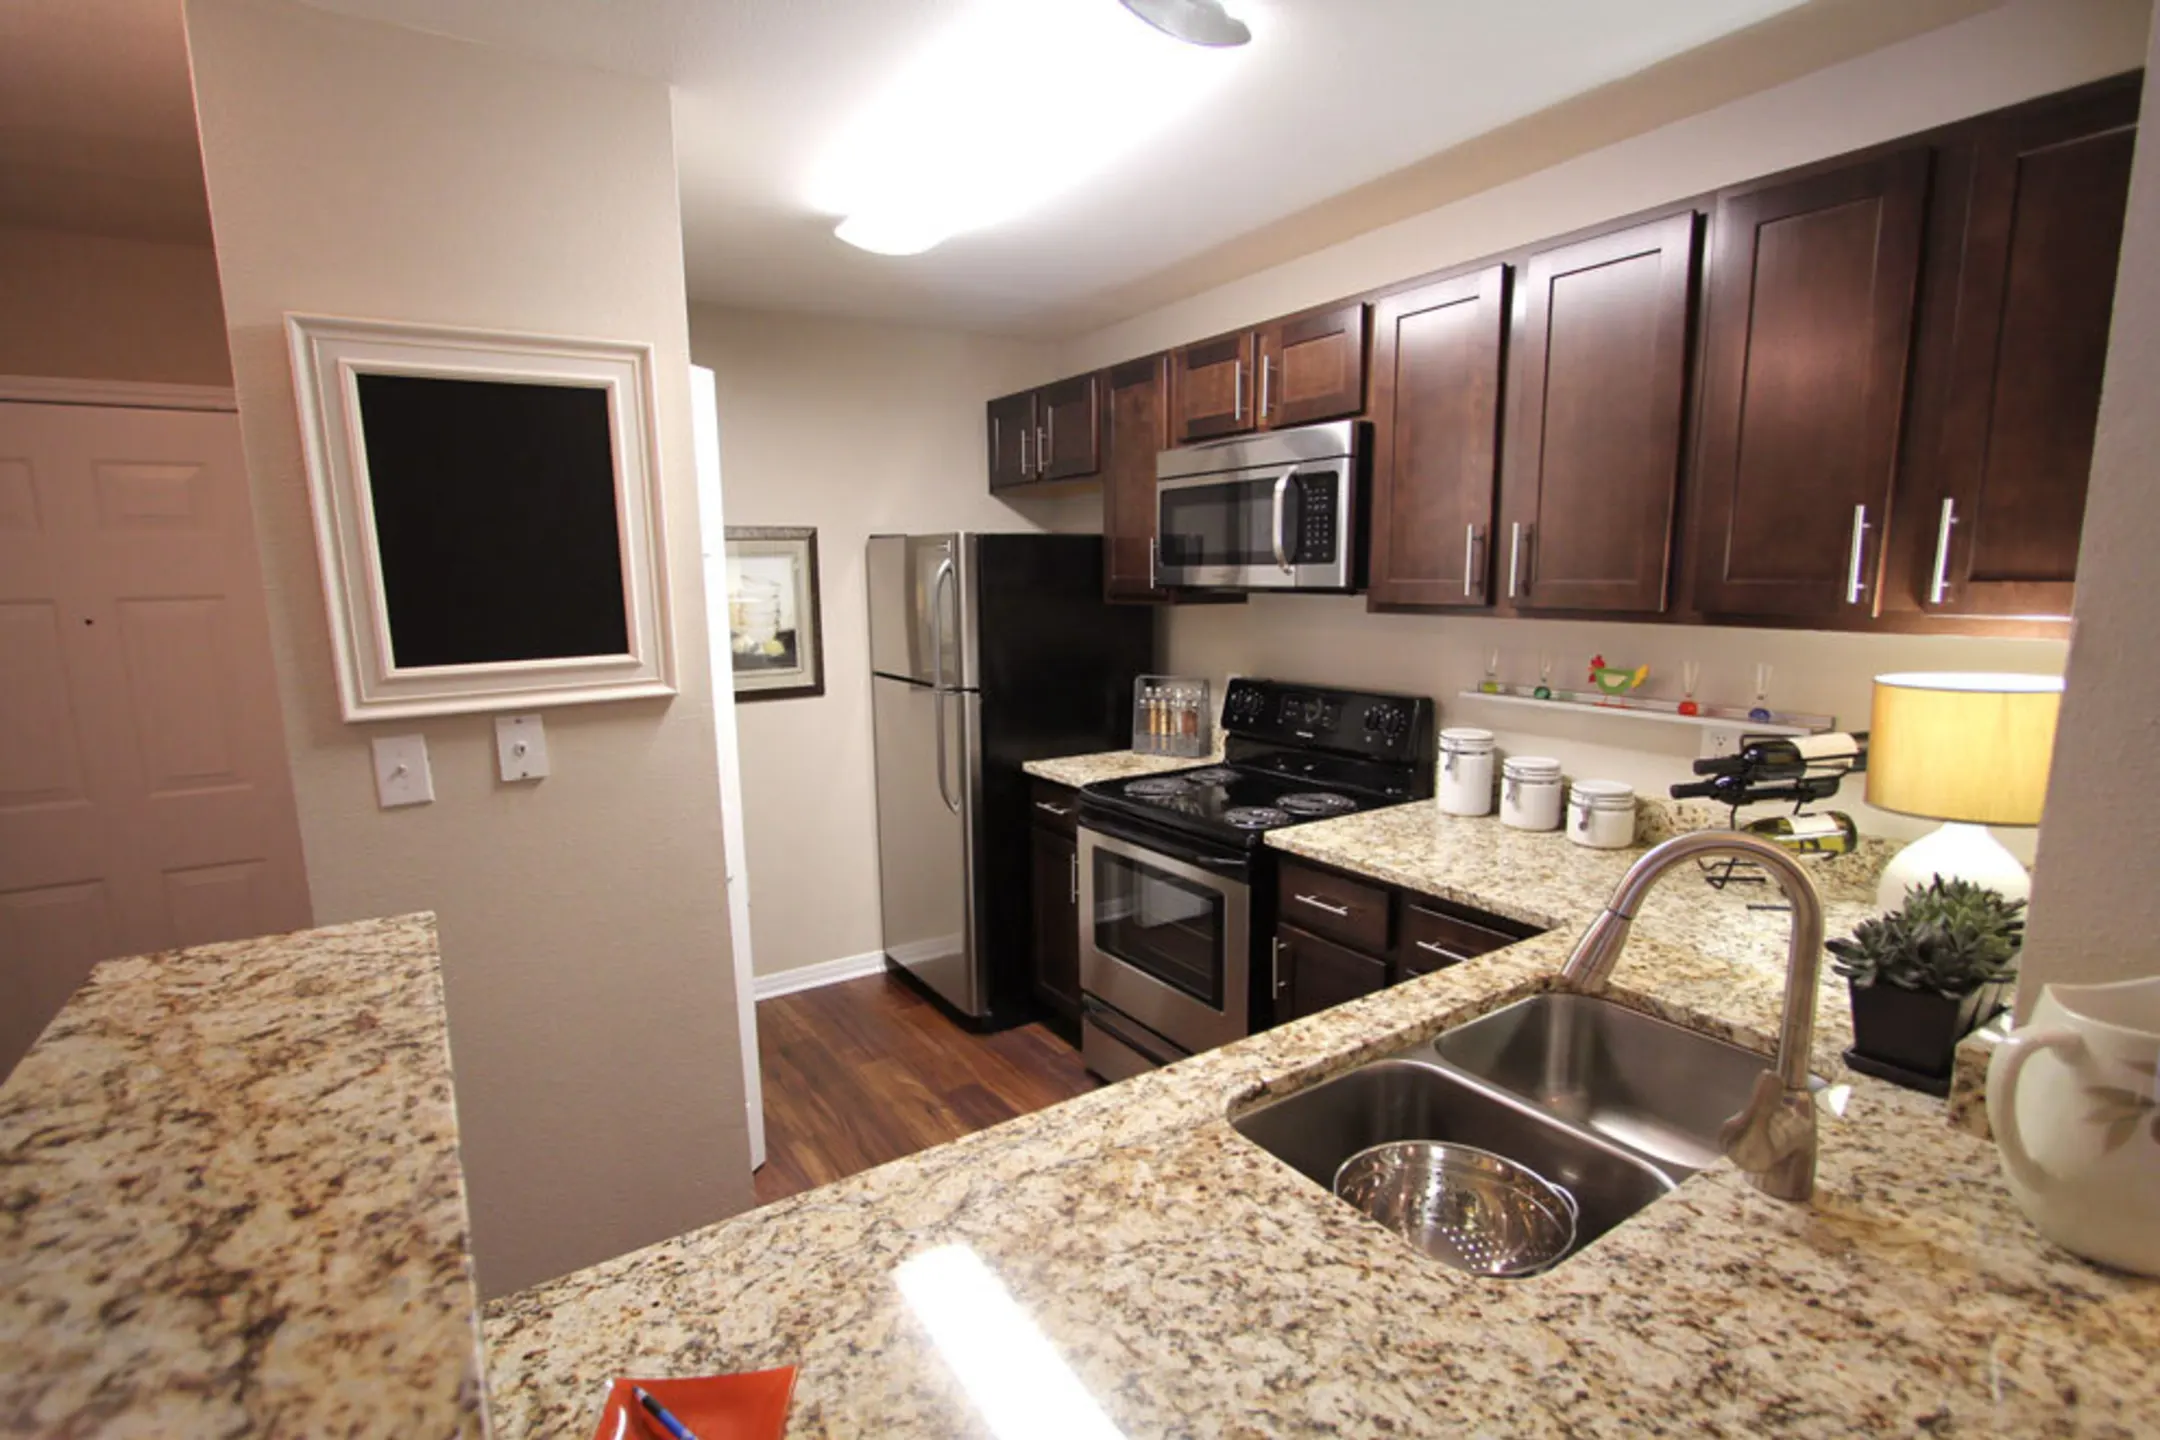 Kitchen - River Crossing At Keystone Apartments - Indianapolis, IN